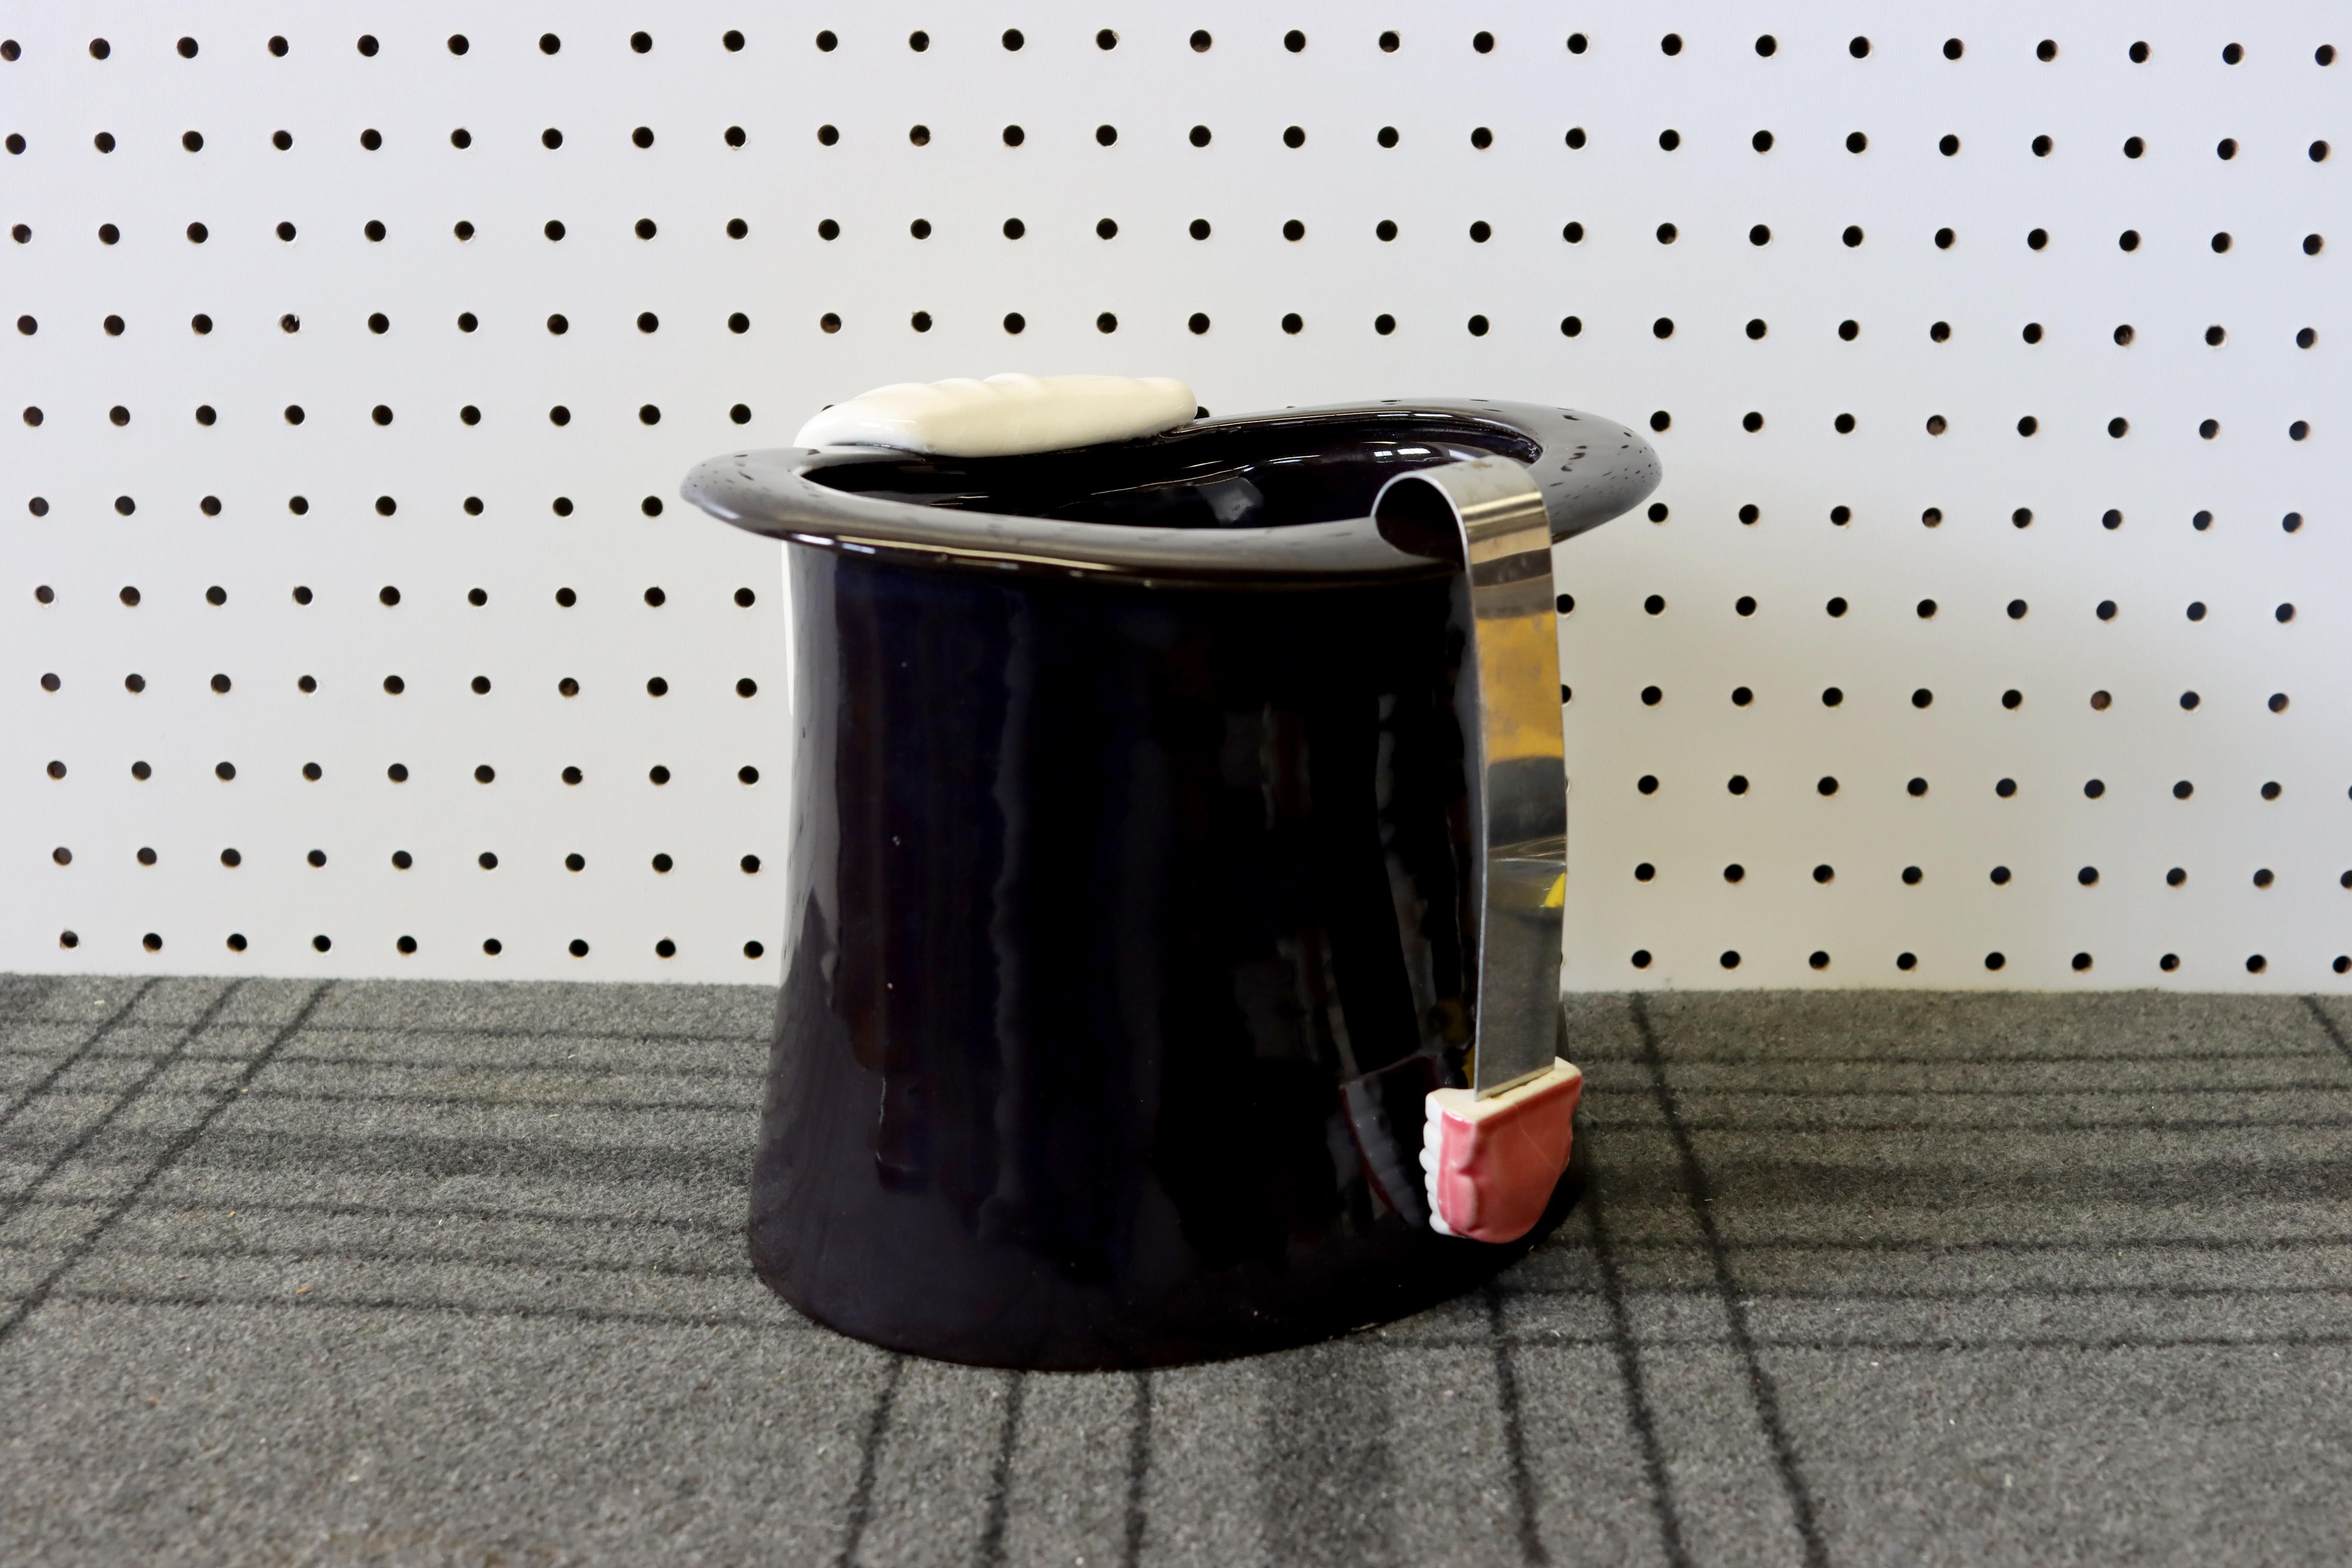 A playful and hilarious grouping of an ice bucket in the form of a magician's hat and tongs in the form of dentures. Sure to make an impression on your guests at the next party.

Ice bucket is in great condition, free of chips and damage. The